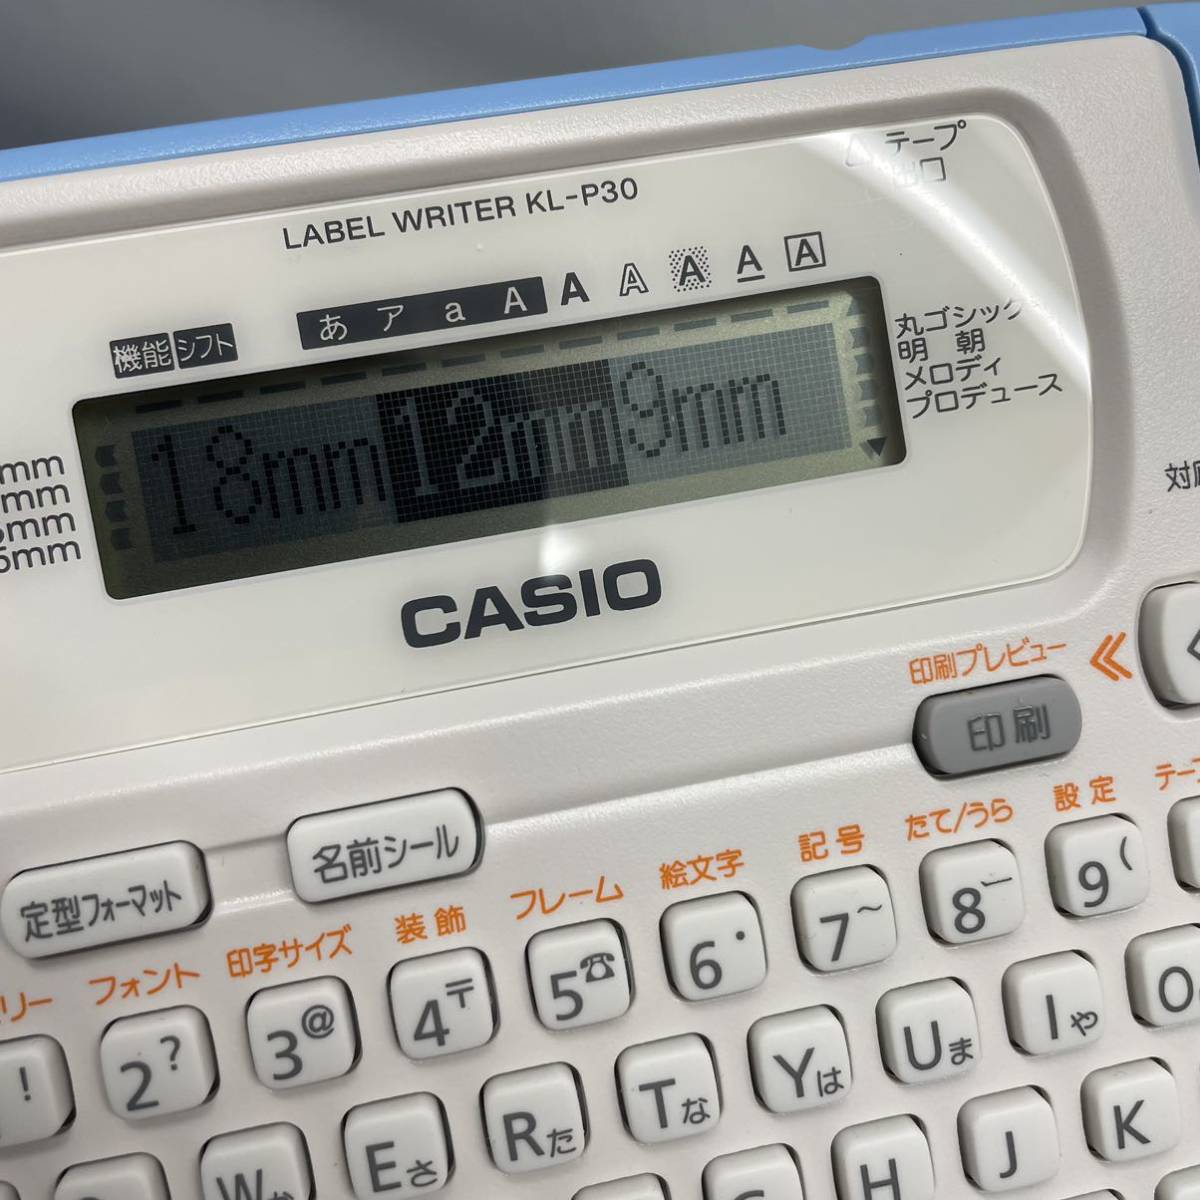 [ operation verification settled ]CASIO Casio NAME LAND name Land 3.5-18mm KL-P30 blue box * owner manual attaching 